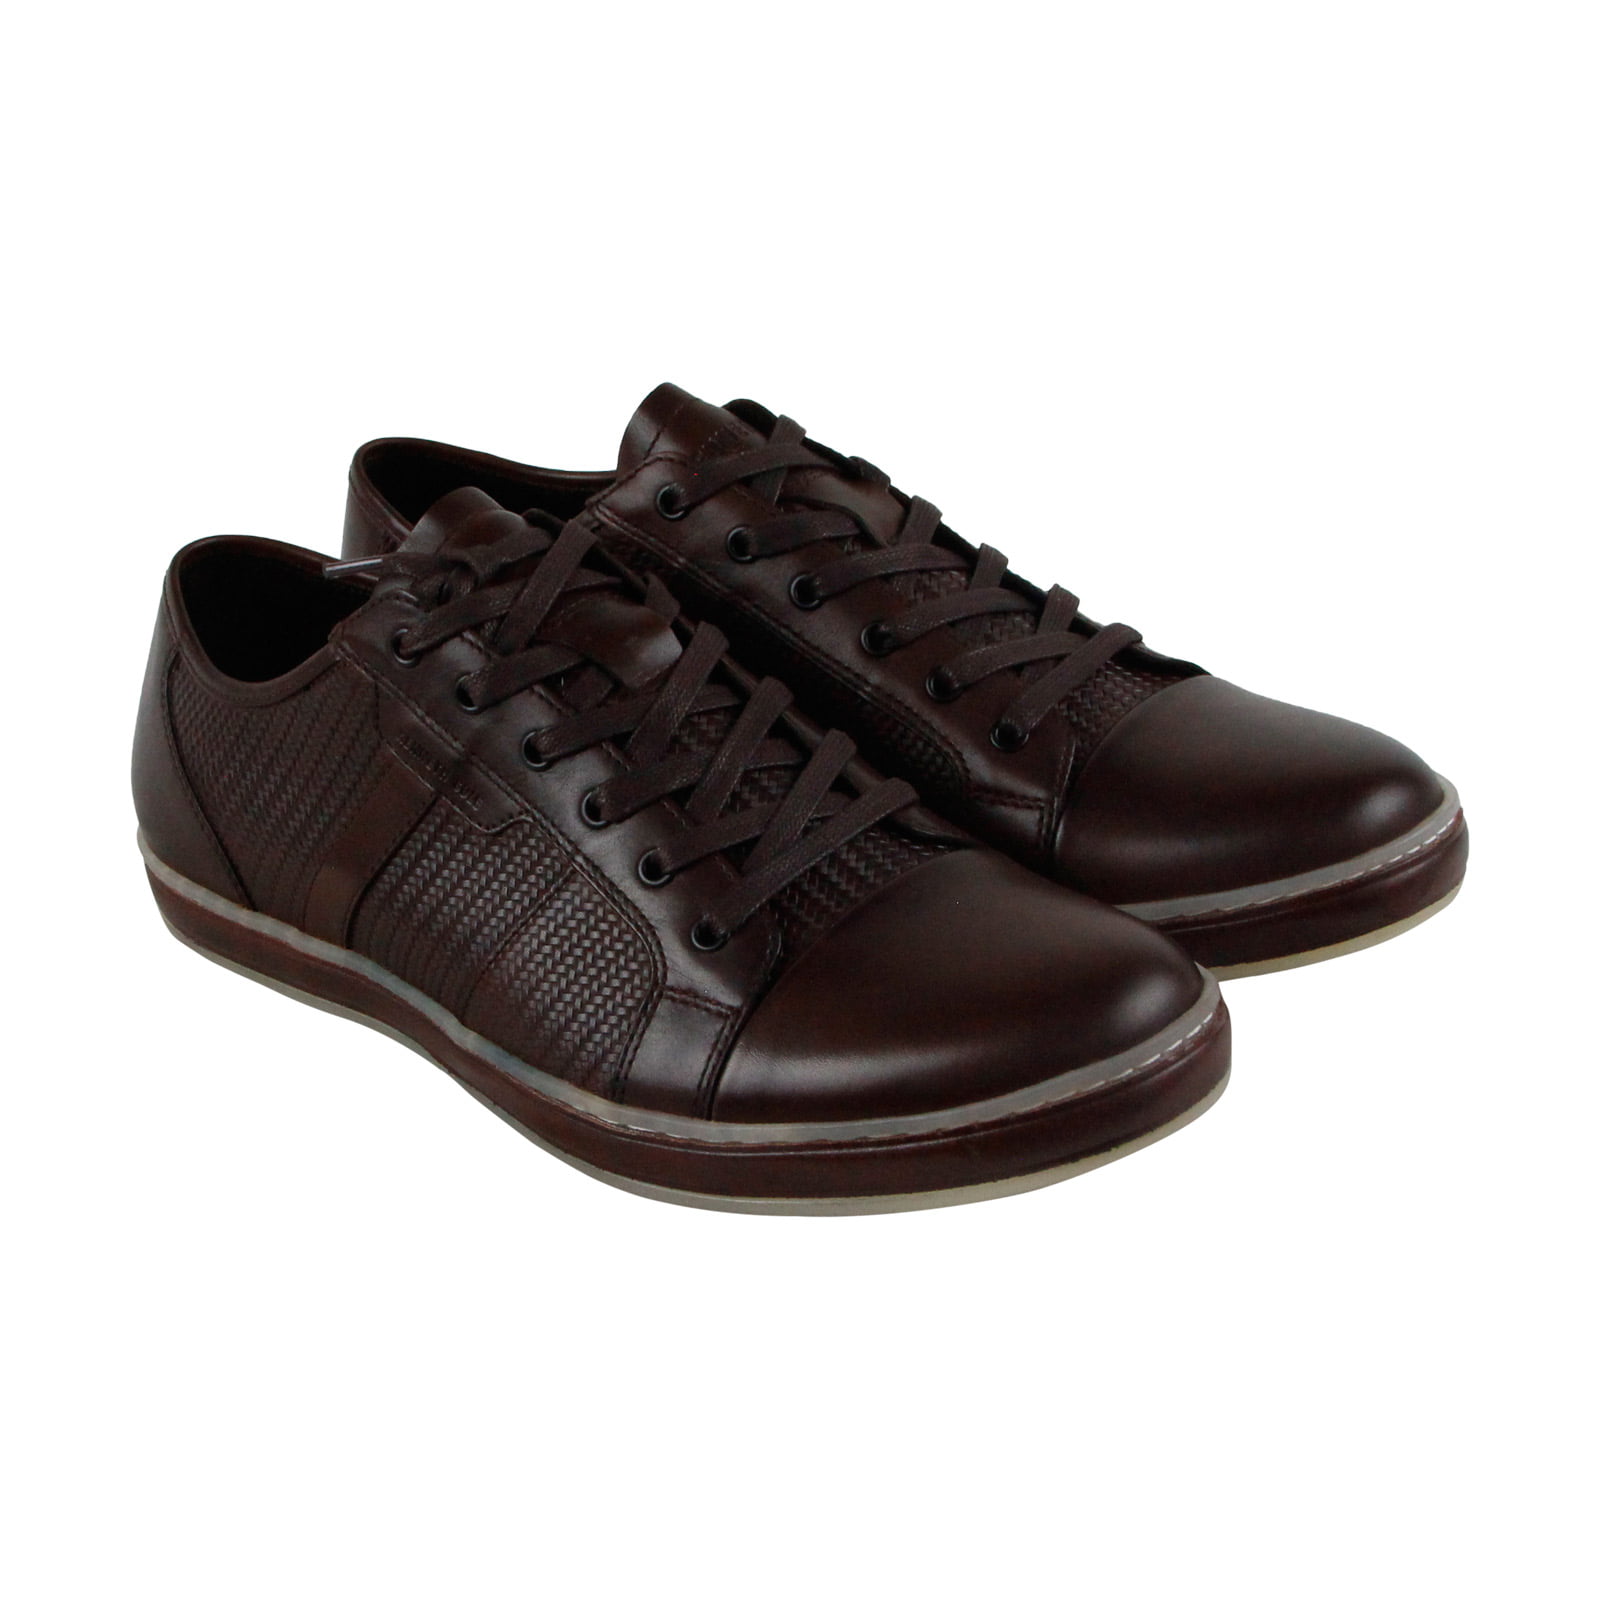 Kenneth Cole - Kenneth Cole New York Brand Wagon 2 Mens Brown Leather ...